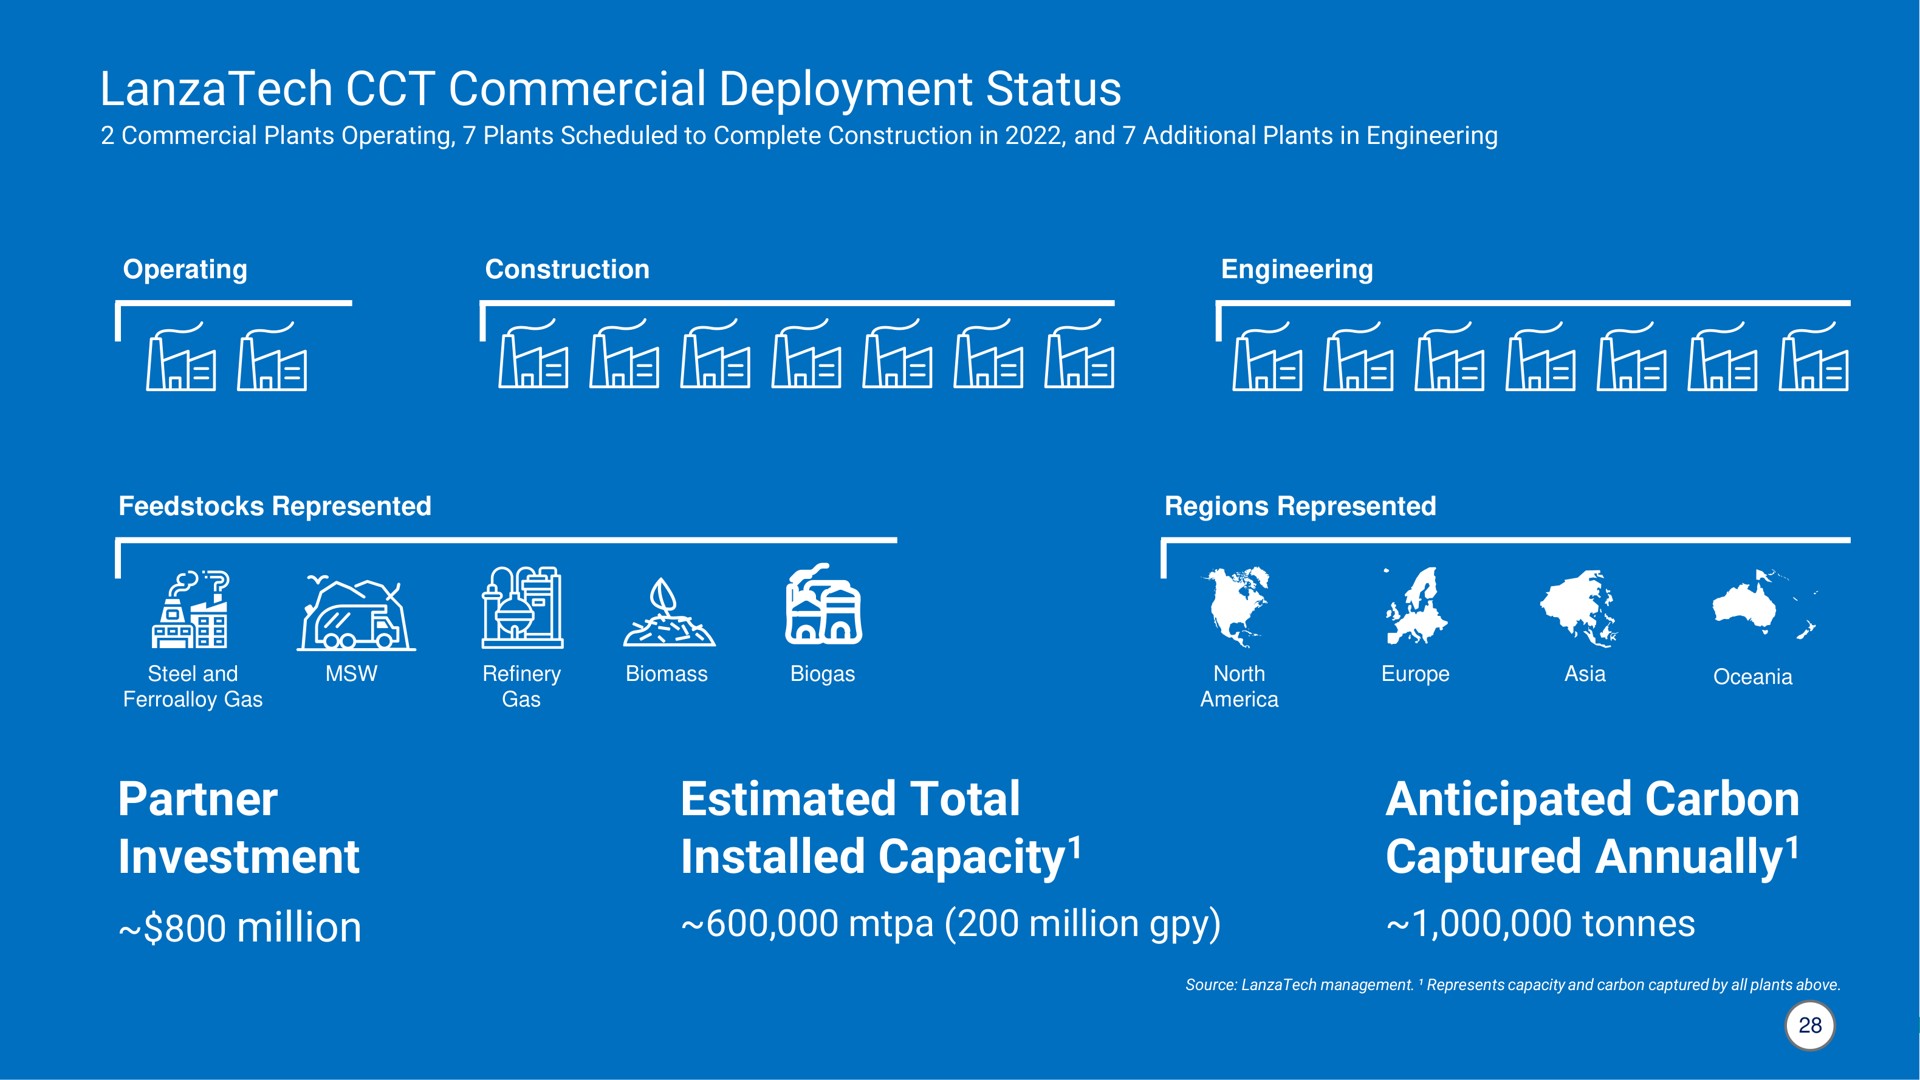 commercial deployment status partner investment million estimated total capacity anticipated carbon captured annually a eel capacity annually | LanzaTech